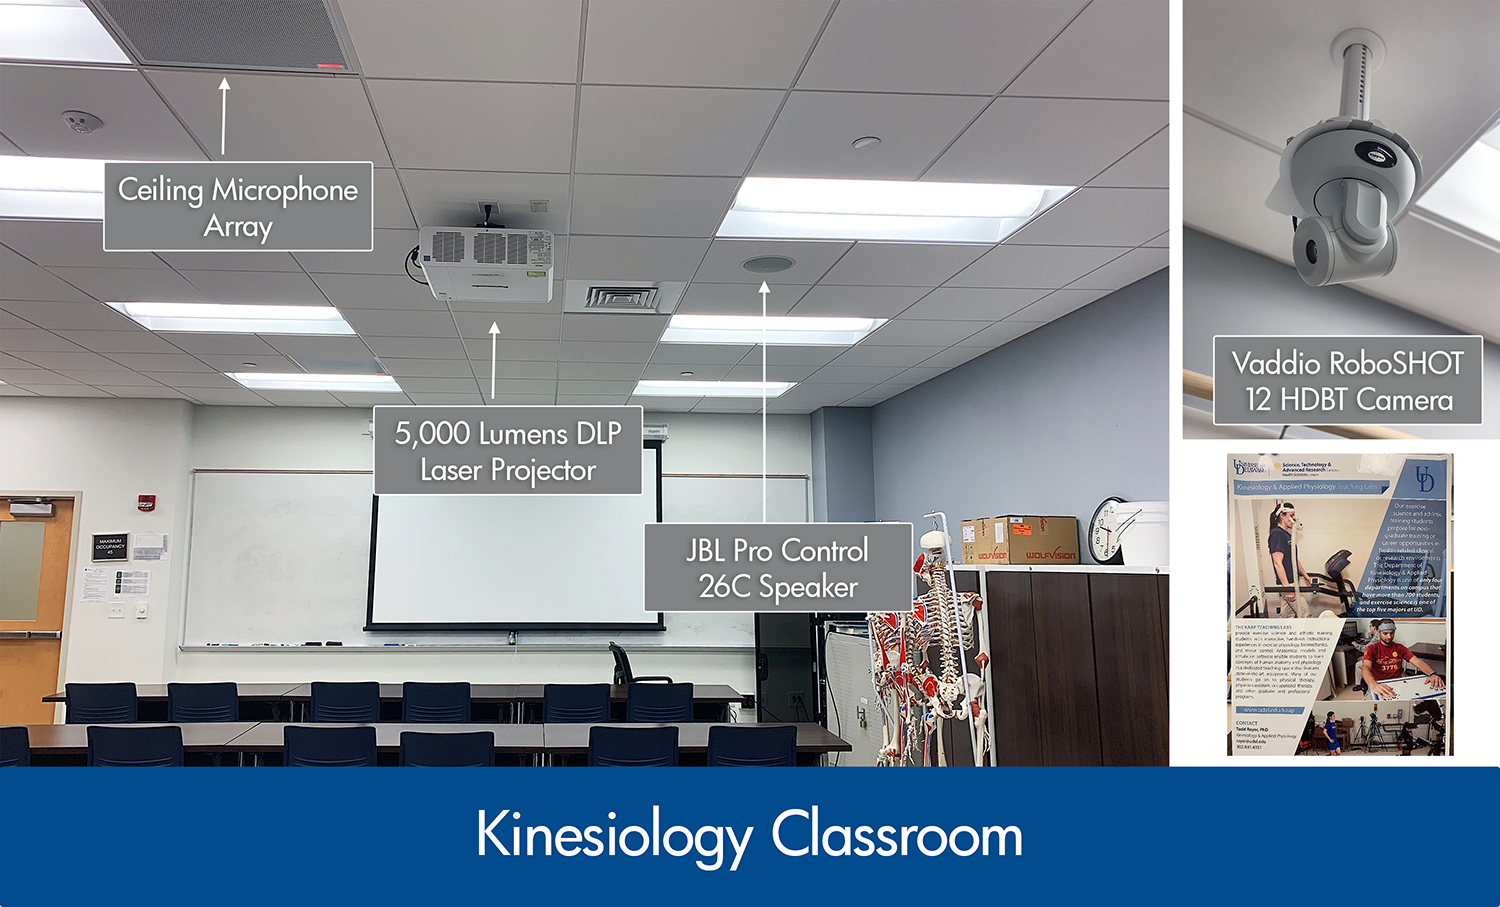 Systems integration in kinesiology classroom